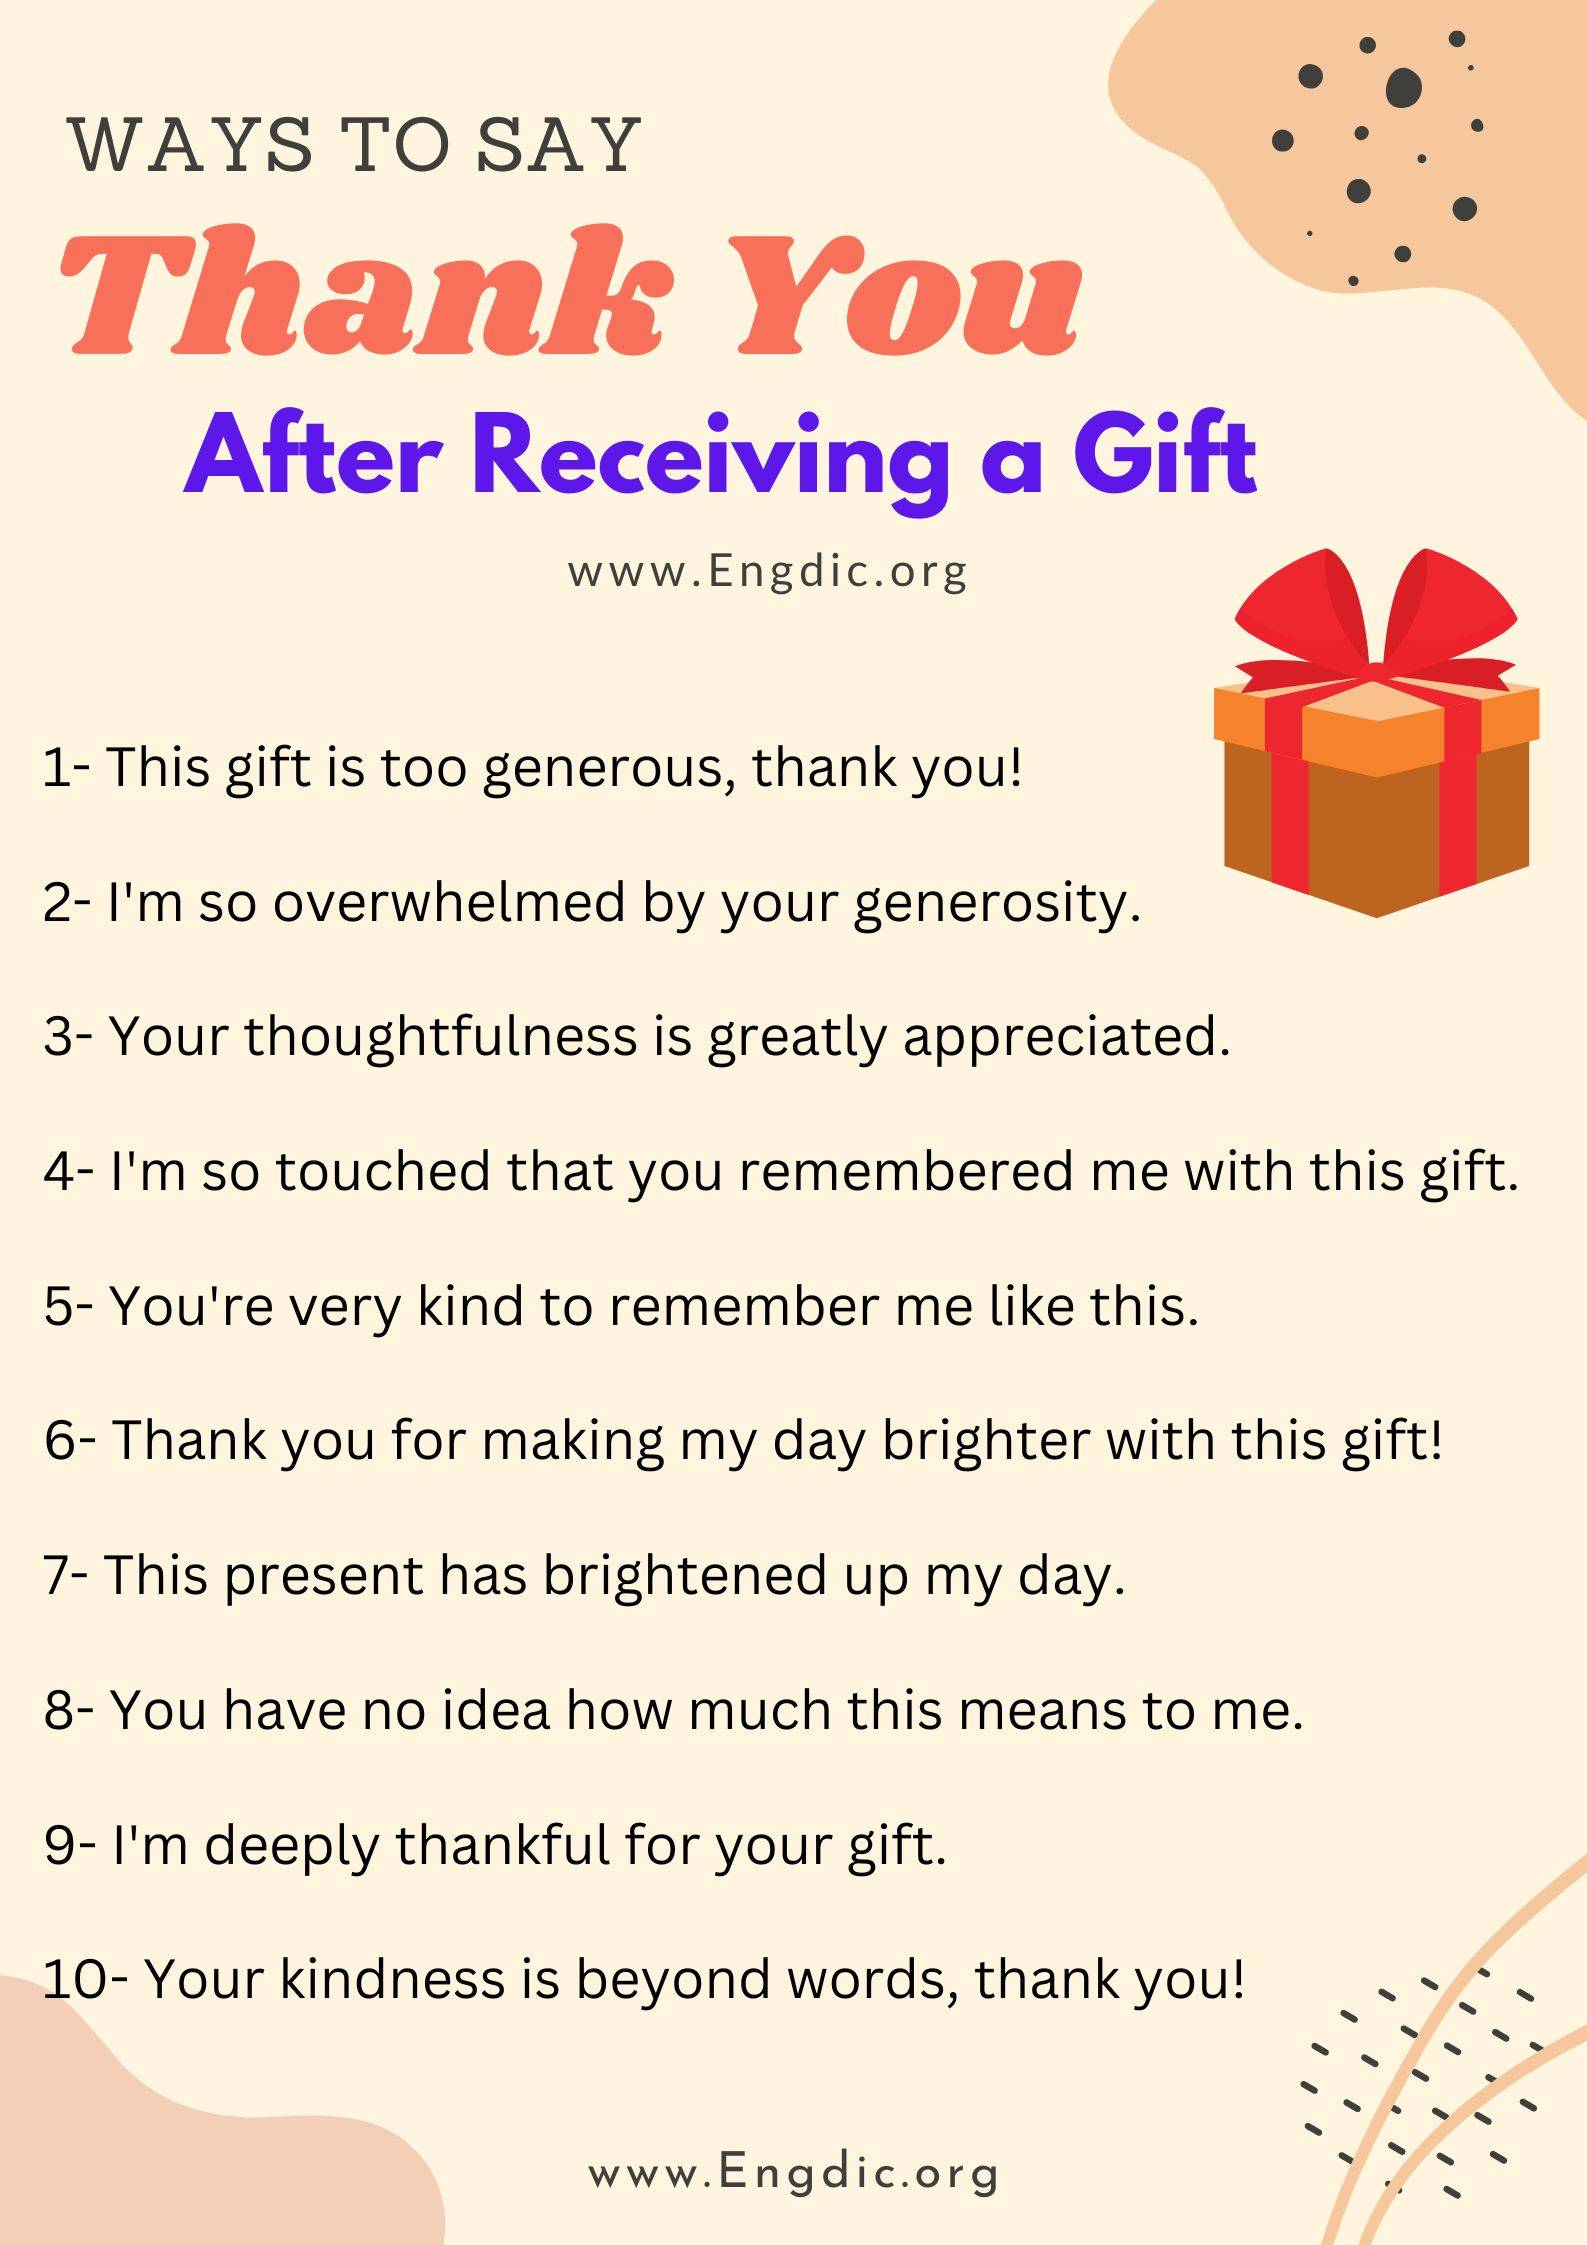 Ways to say thank you After Receiving a Gift